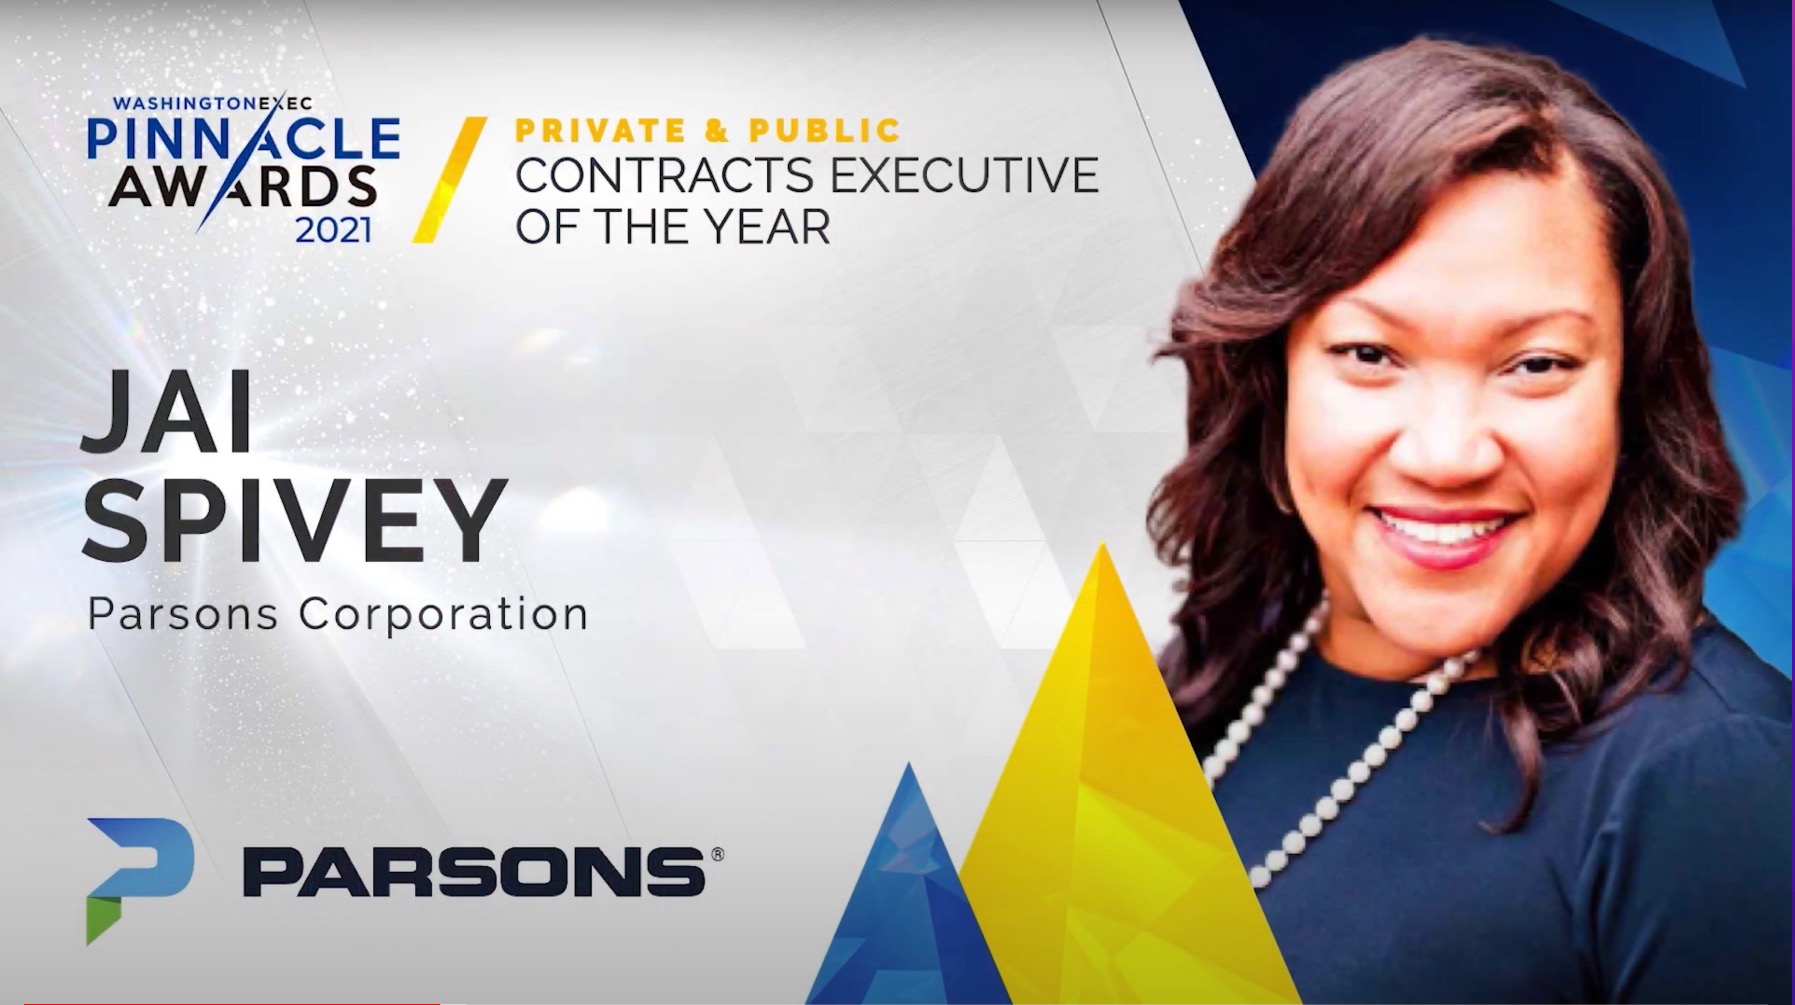 Contracts - Congratulations to Jai Spivey from Parsons Corporation on winning the award for Contracts Executive of the Year in the Private & Public Sectors